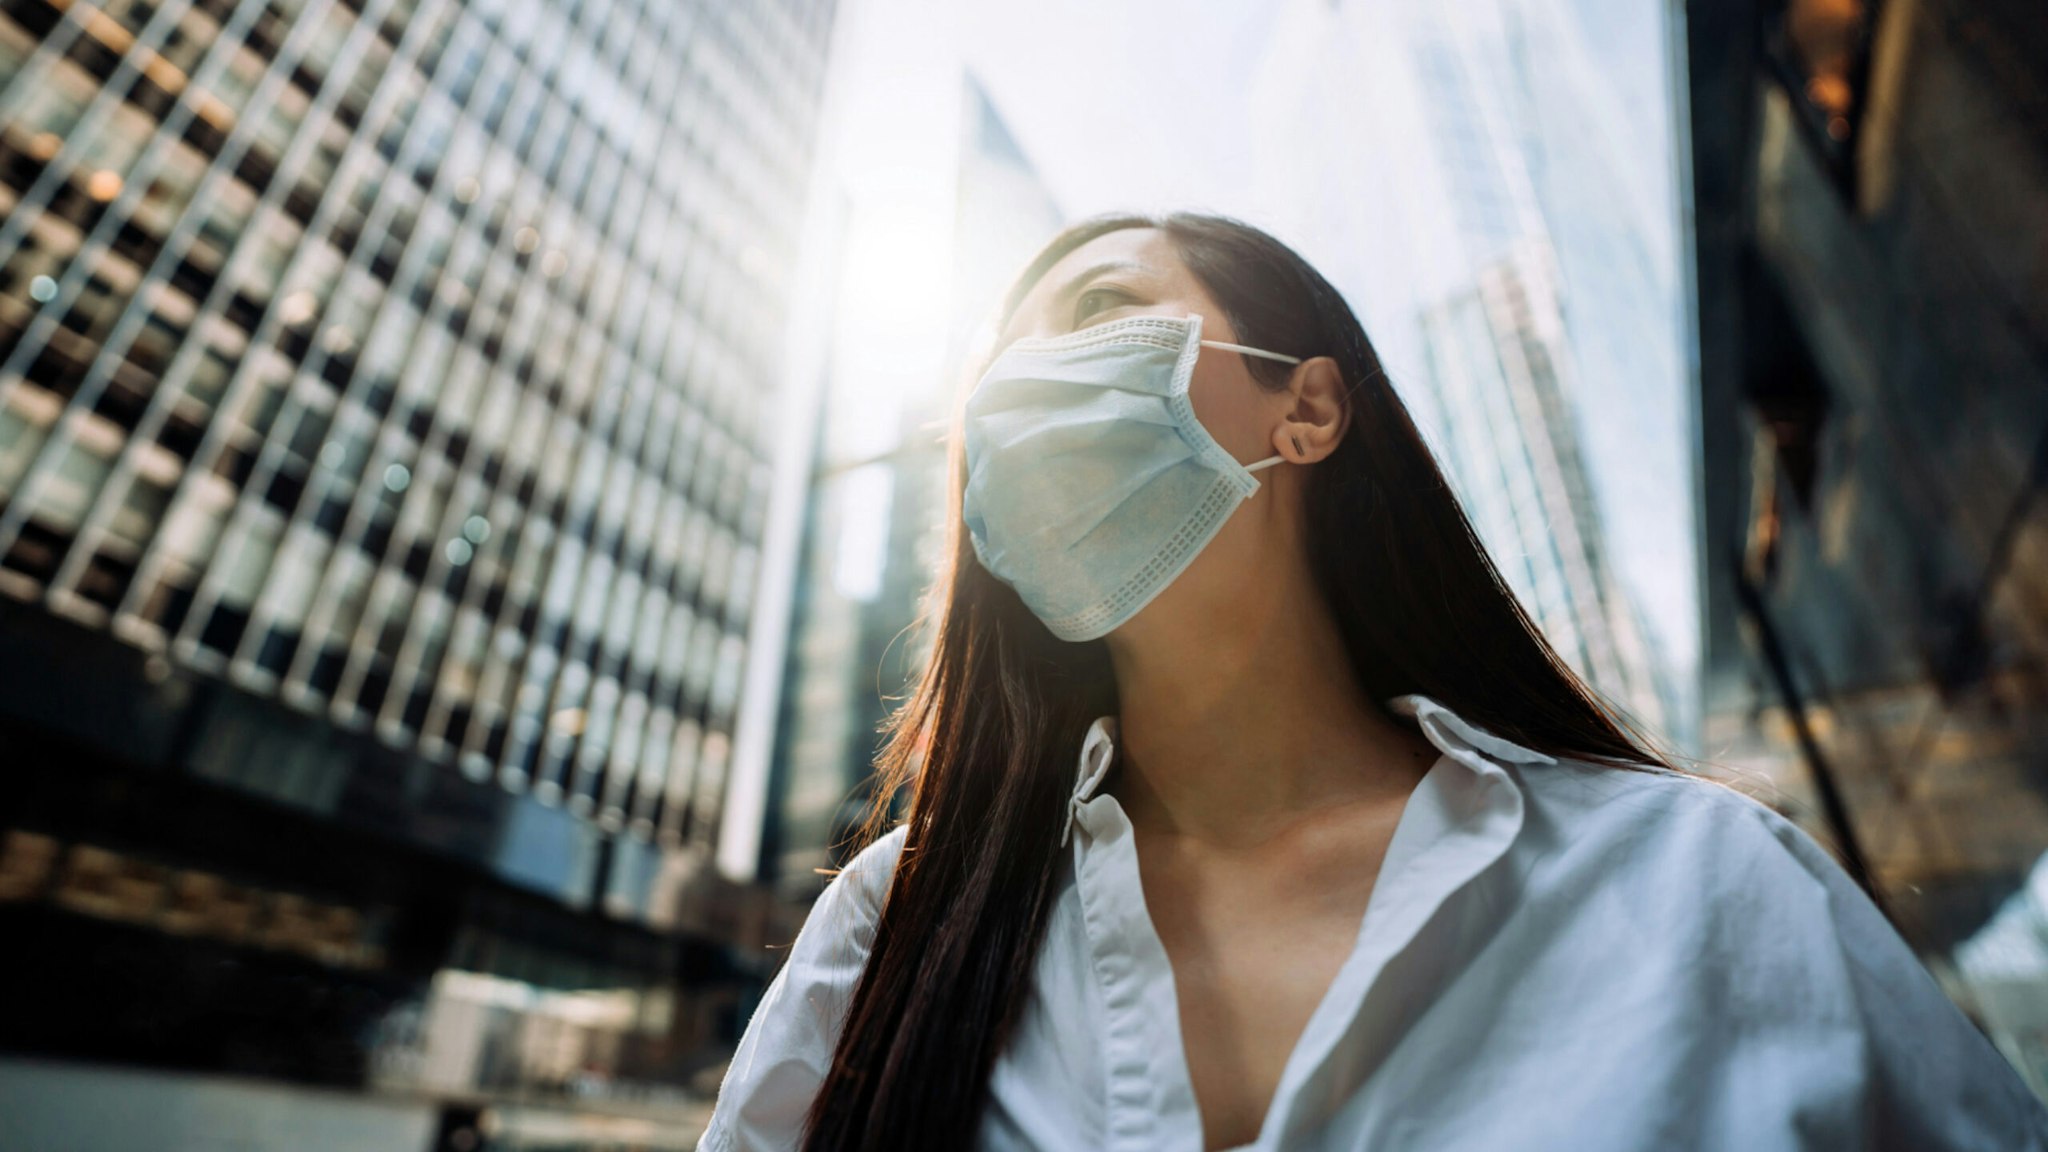 Young Asian businesswoman with protective face mask to protect and prevent from the spread of viruses during the coronavirus health crisis, standing in an energetic and prosperous downtown city street against corporate skyscrapers.